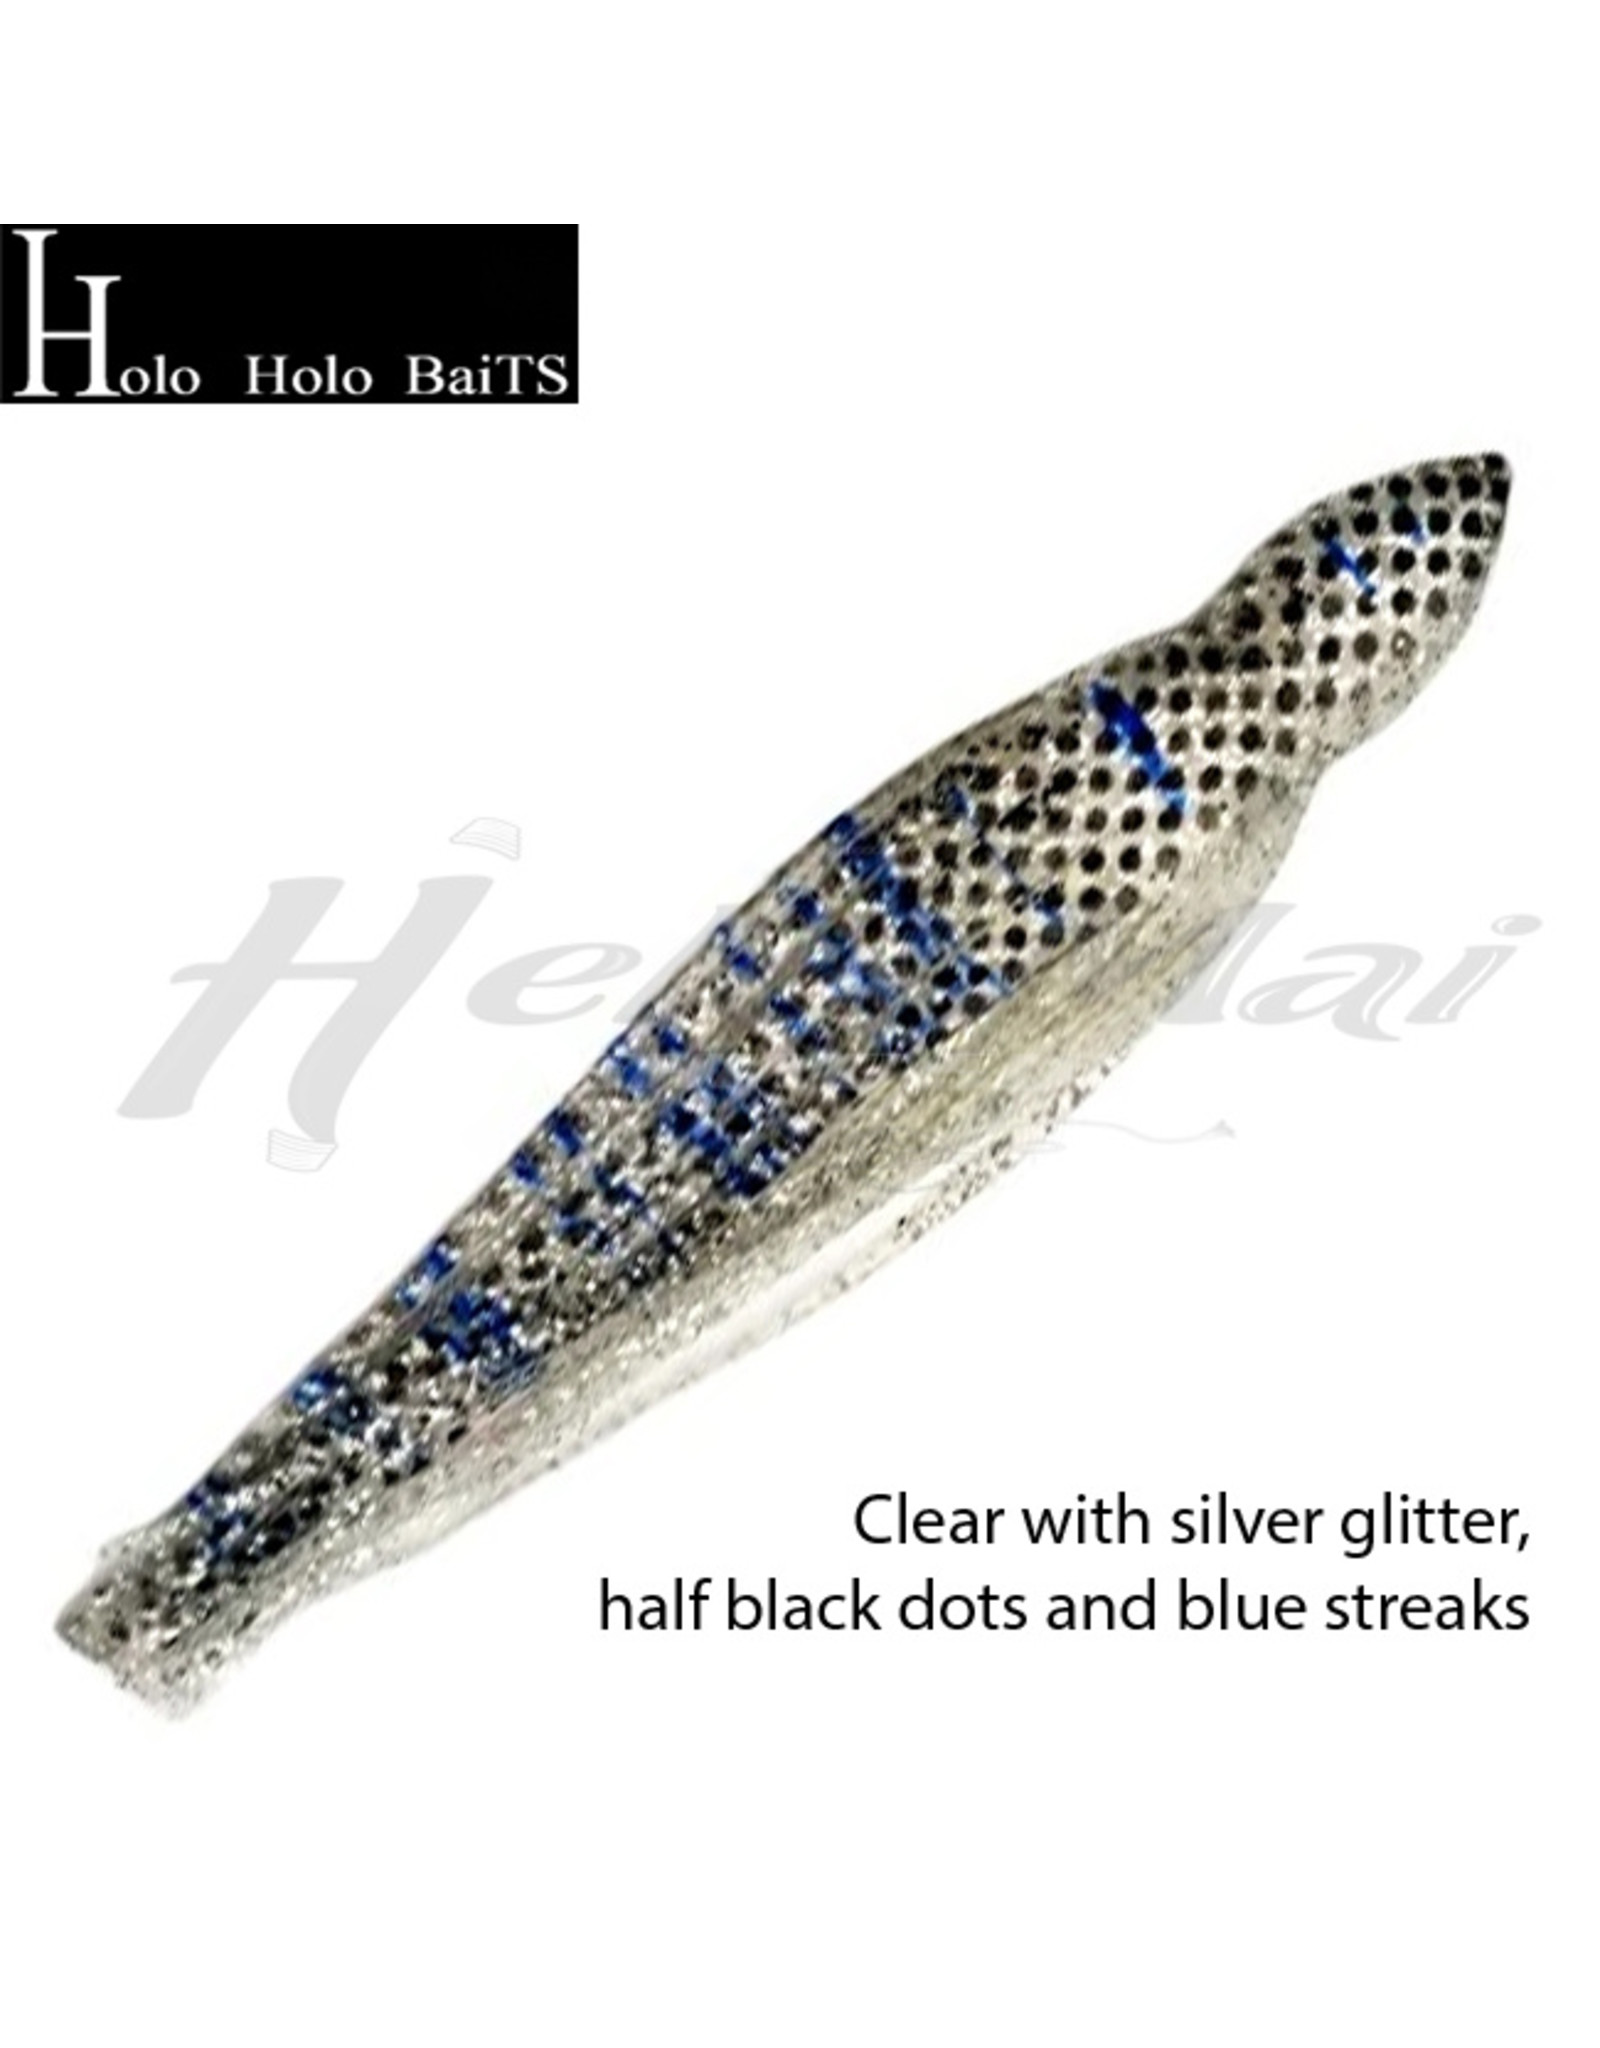 HOLO HOLO HH, 9" SQUID SKIRT MILKY SILVER GLITTER DOTS 1113